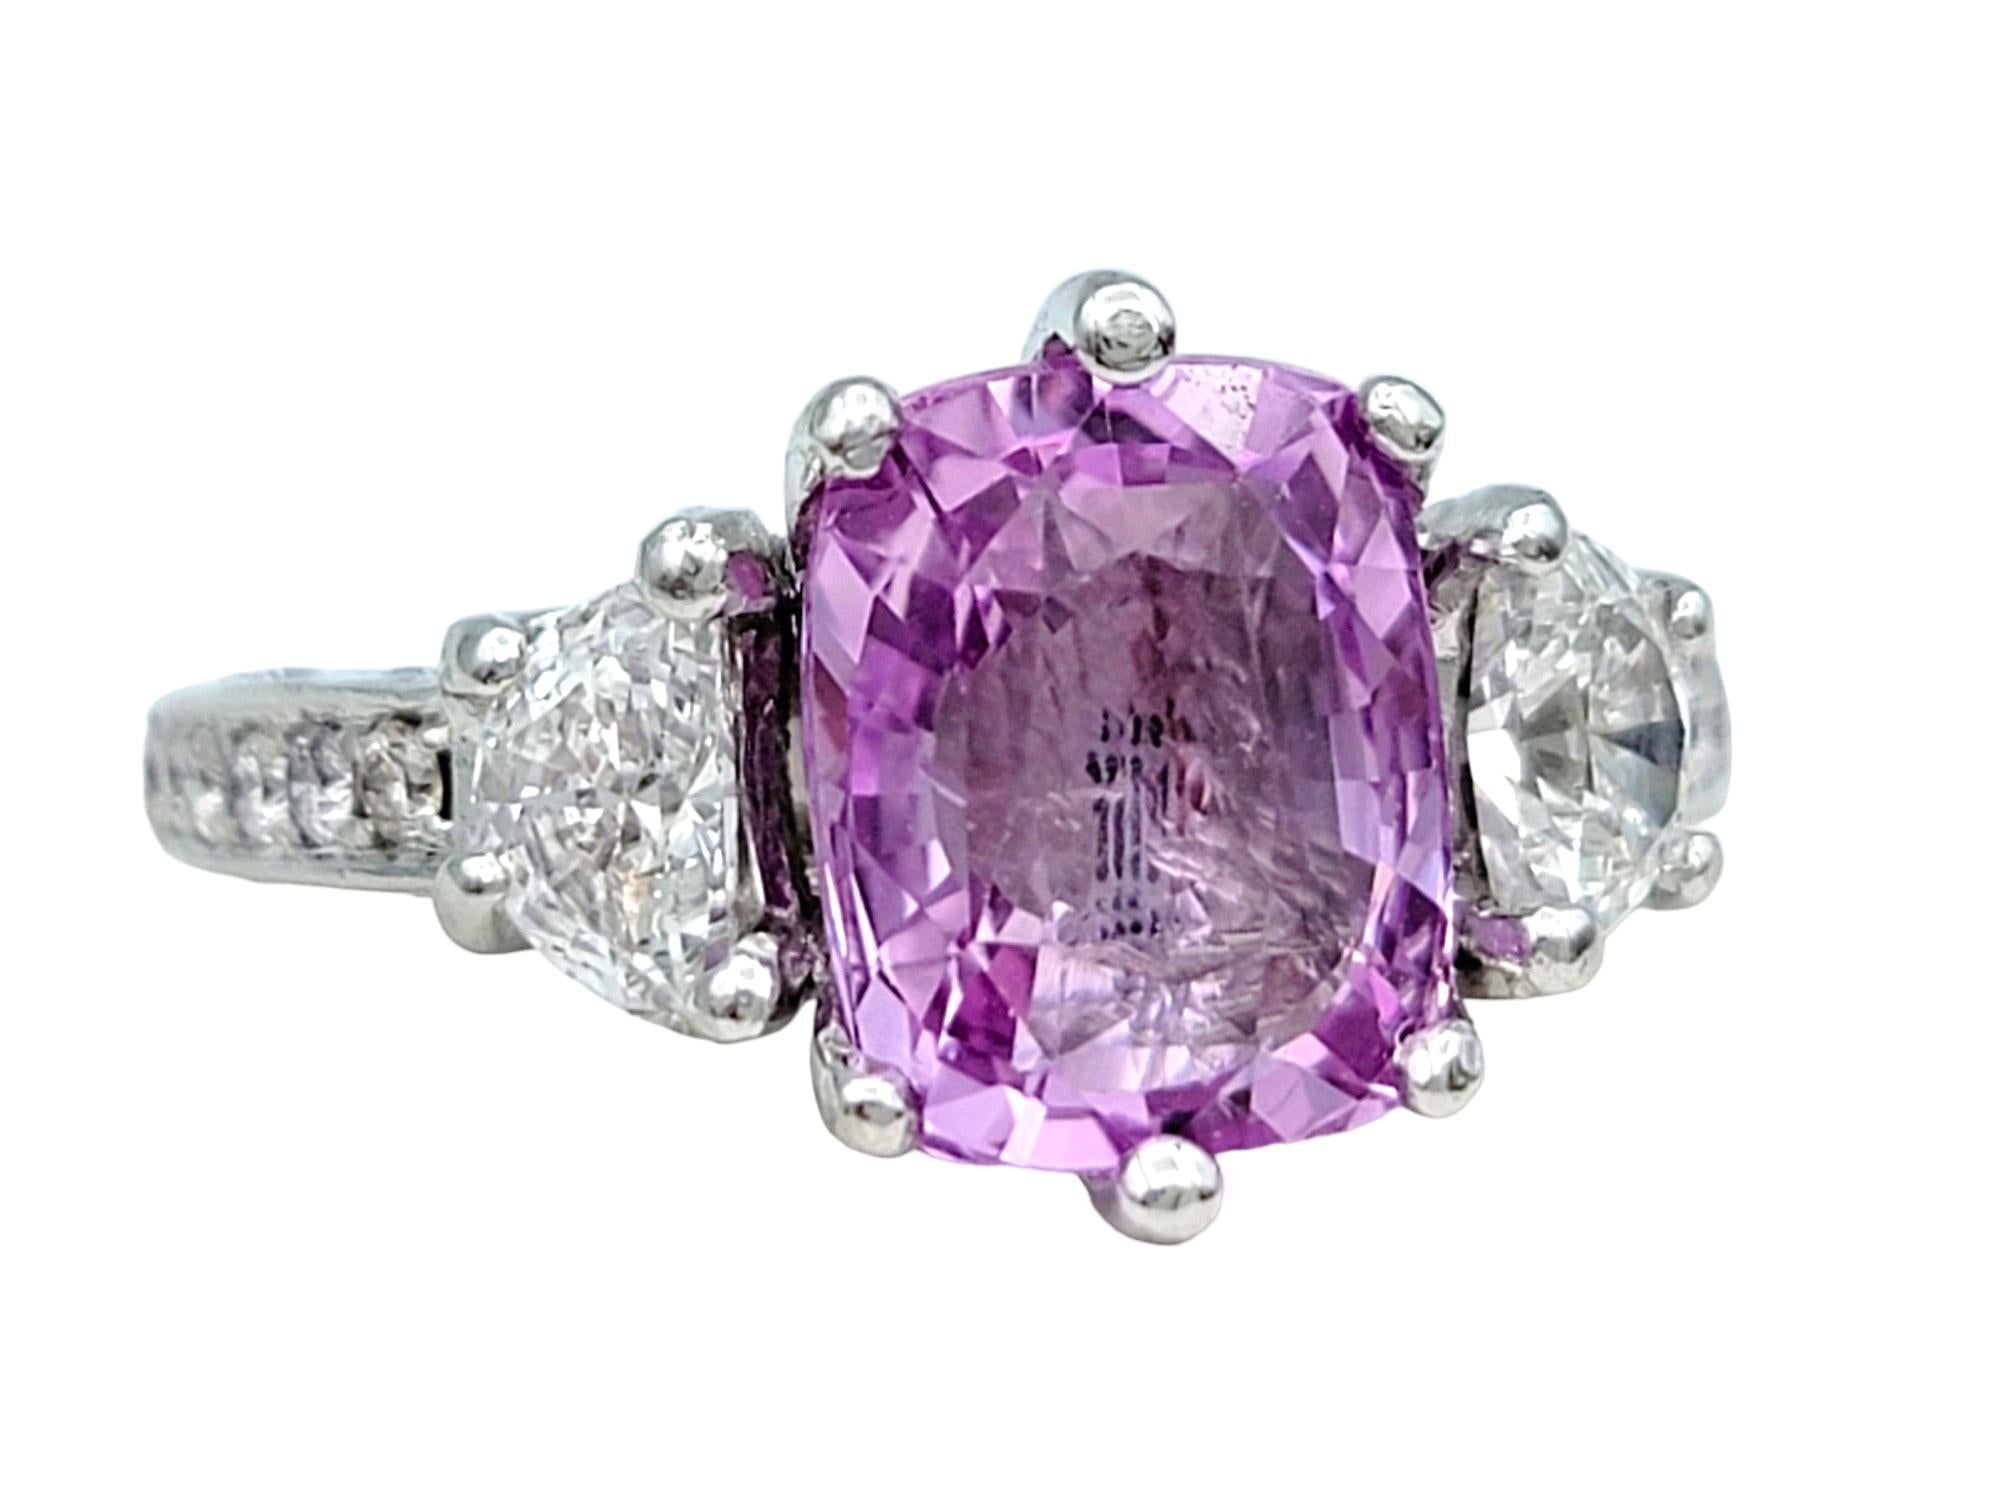 Ring Size: 5.75

This exquisite three-stone ring showcases a striking combination of elegance and sophistication. Set in platinum, the centerpiece features a captivating pink cushion sapphire, exuding a soft yet vibrant hue that immediately catches